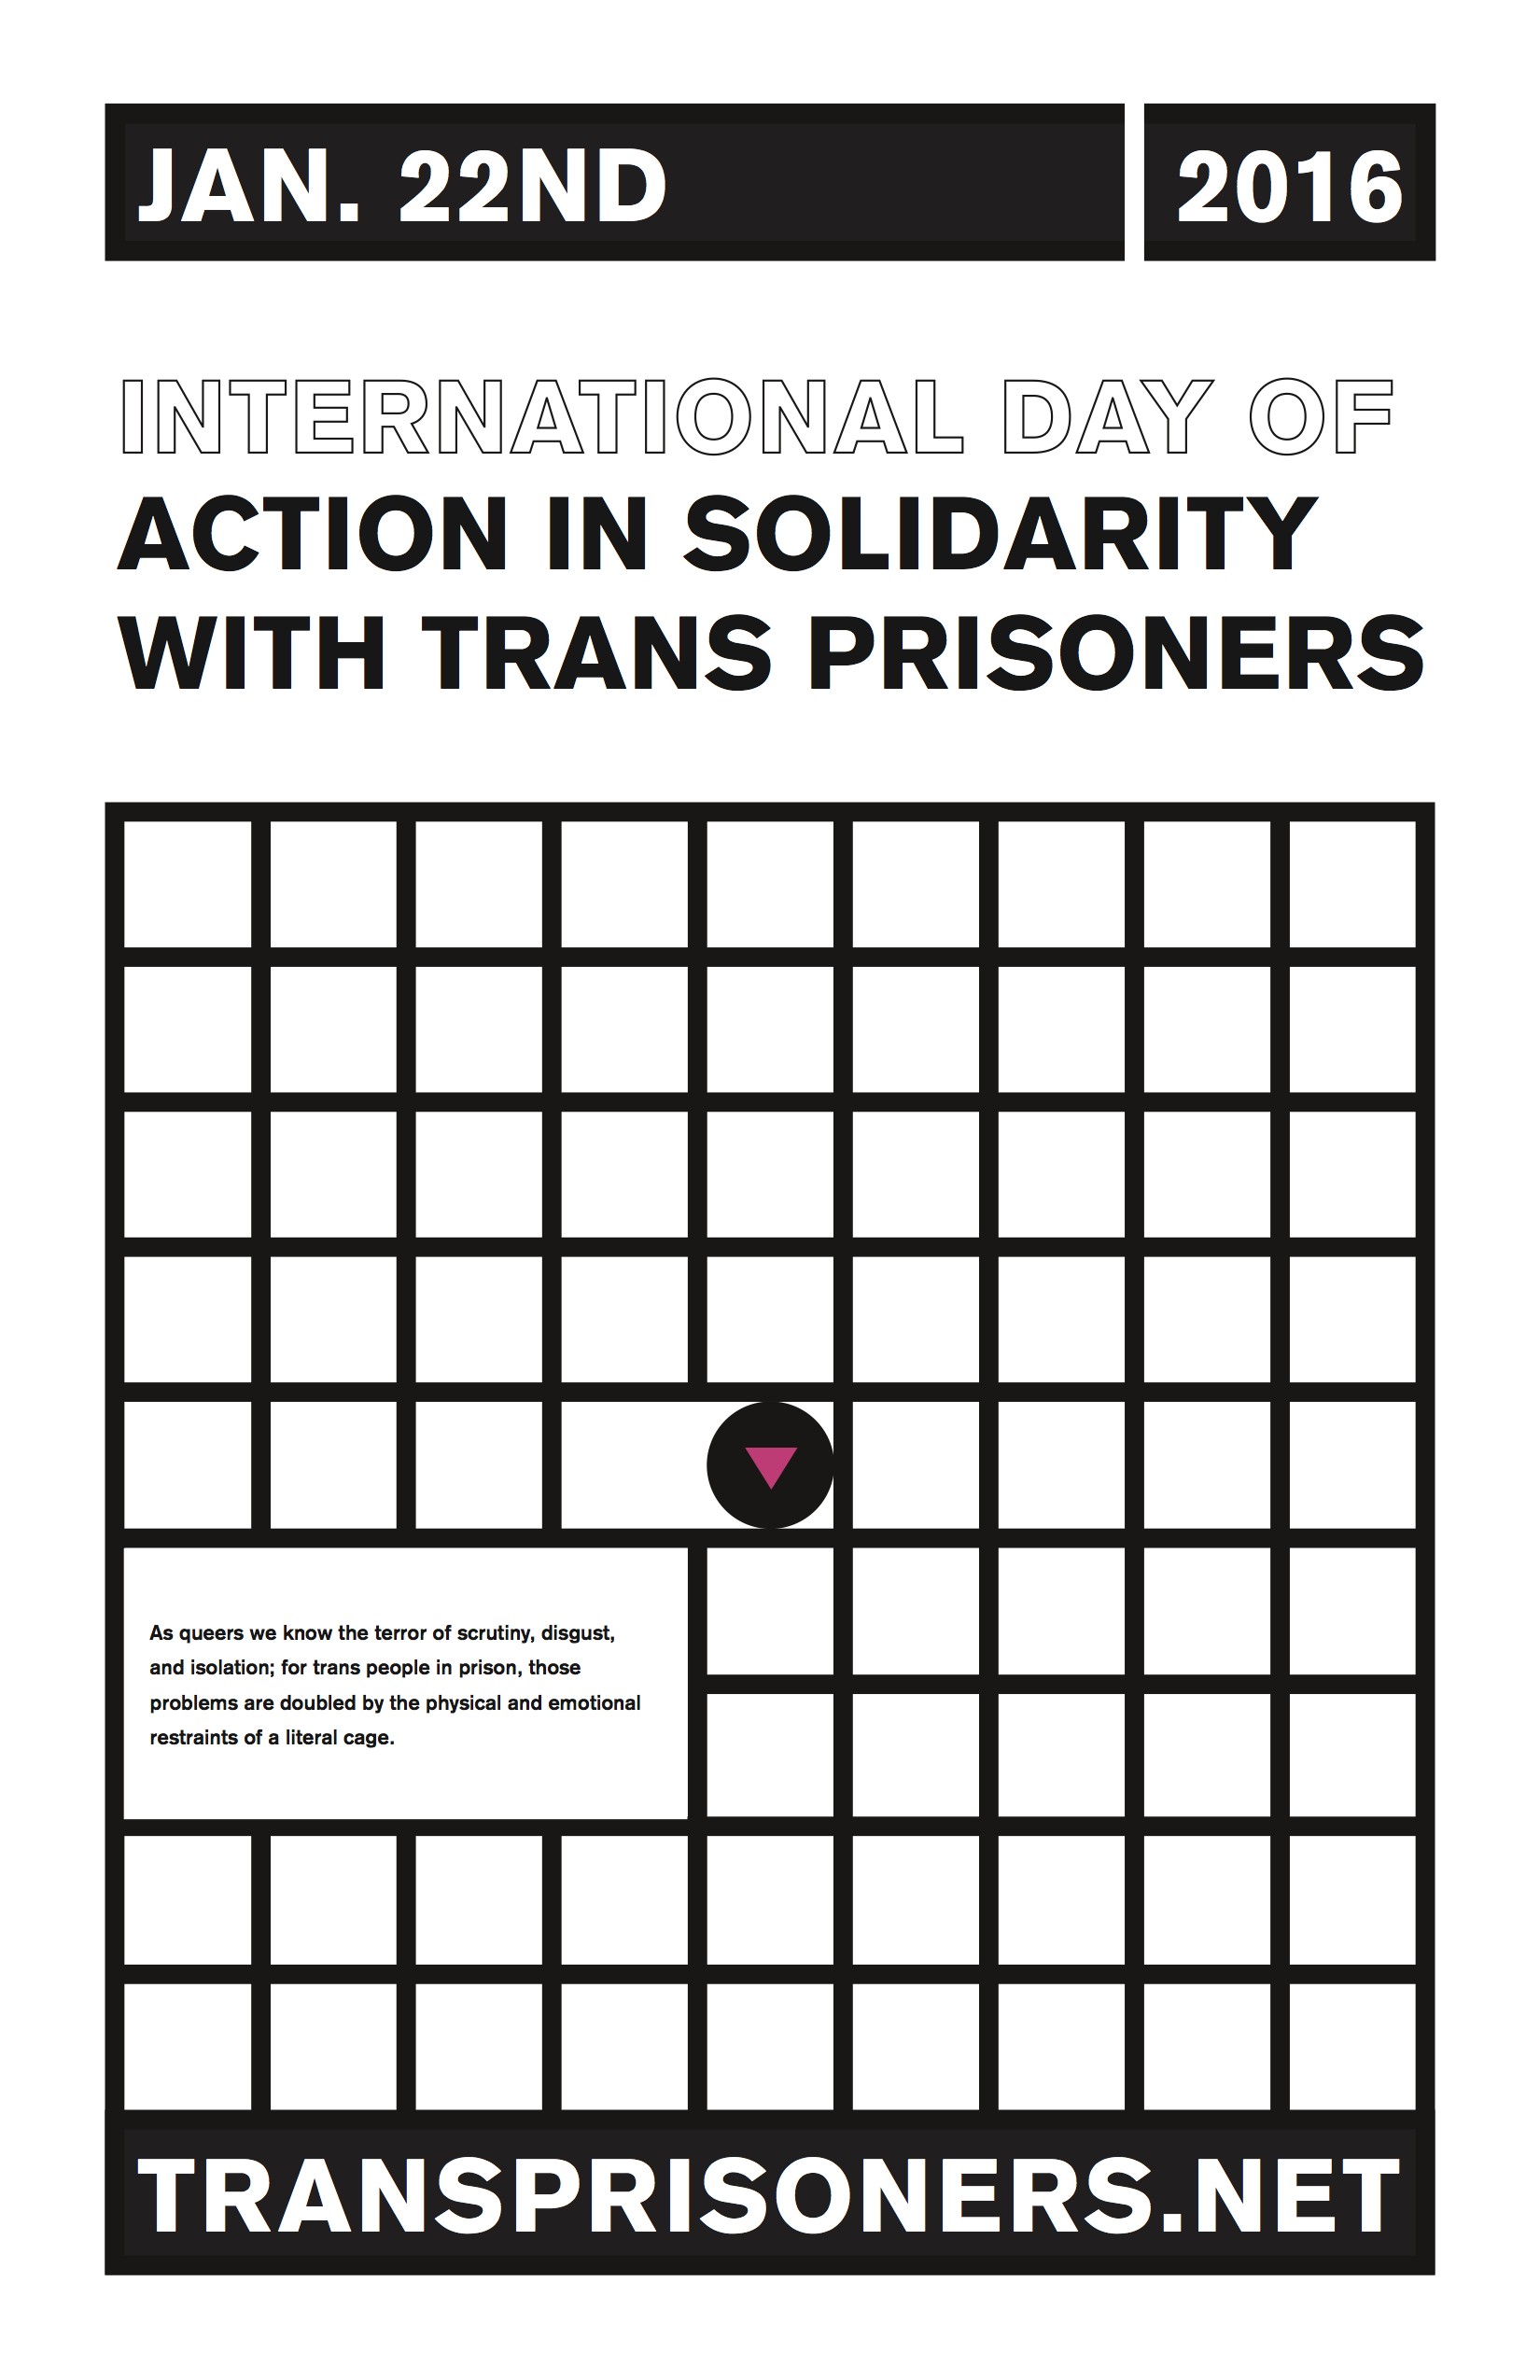 15-021-action-and-solidary-trans-prisoner-poster-send